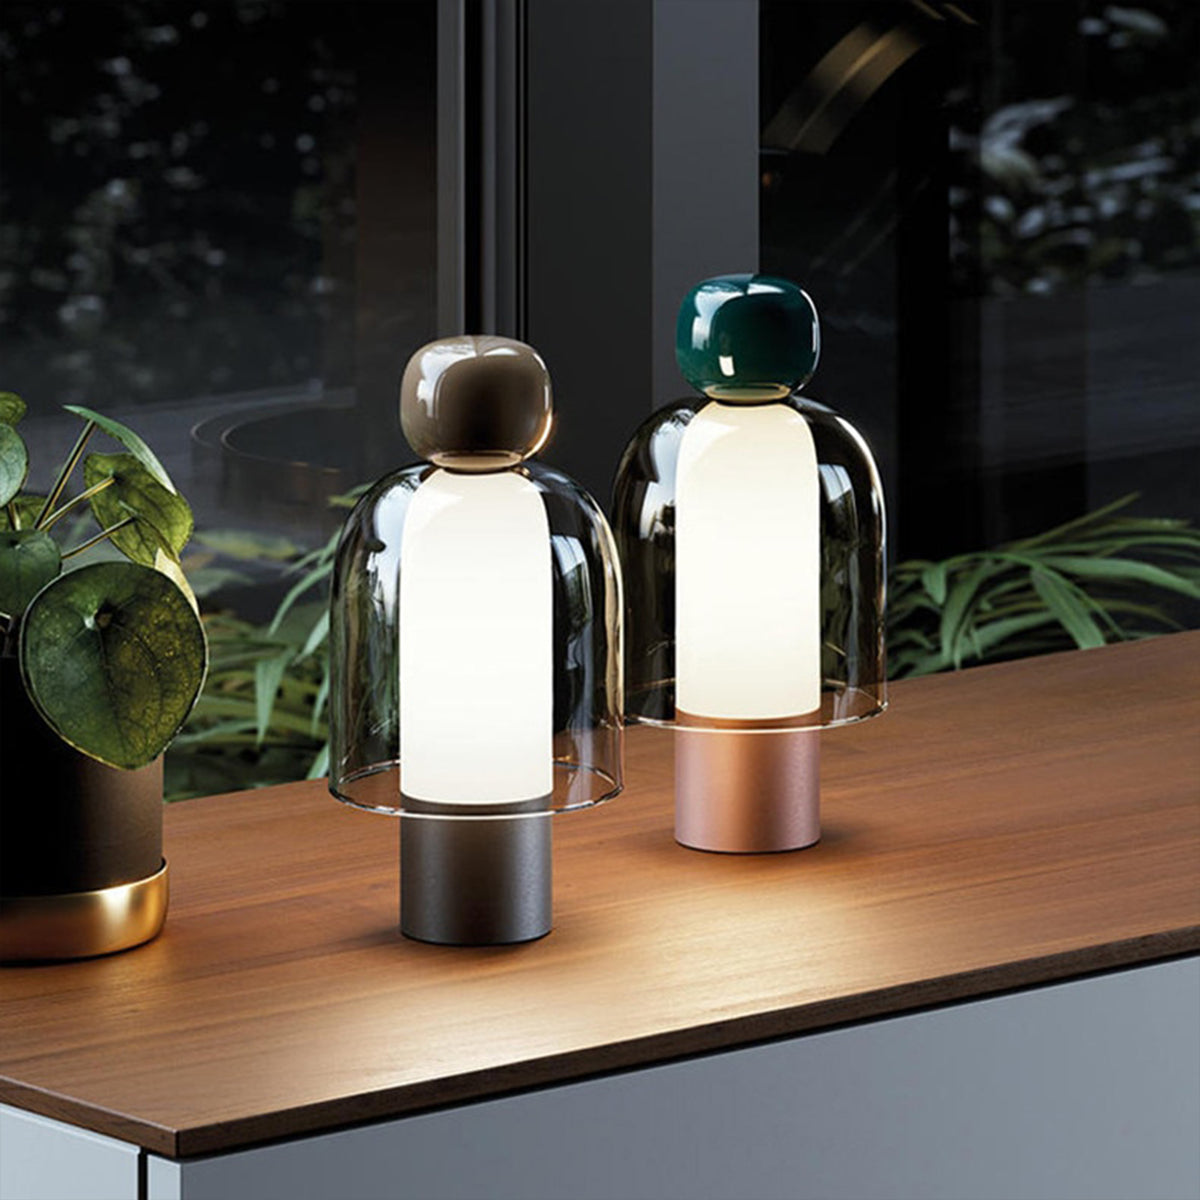 Easy Peasy is the attractive compact lamp décor that is ideal for sitting on your gorgeous console table. 